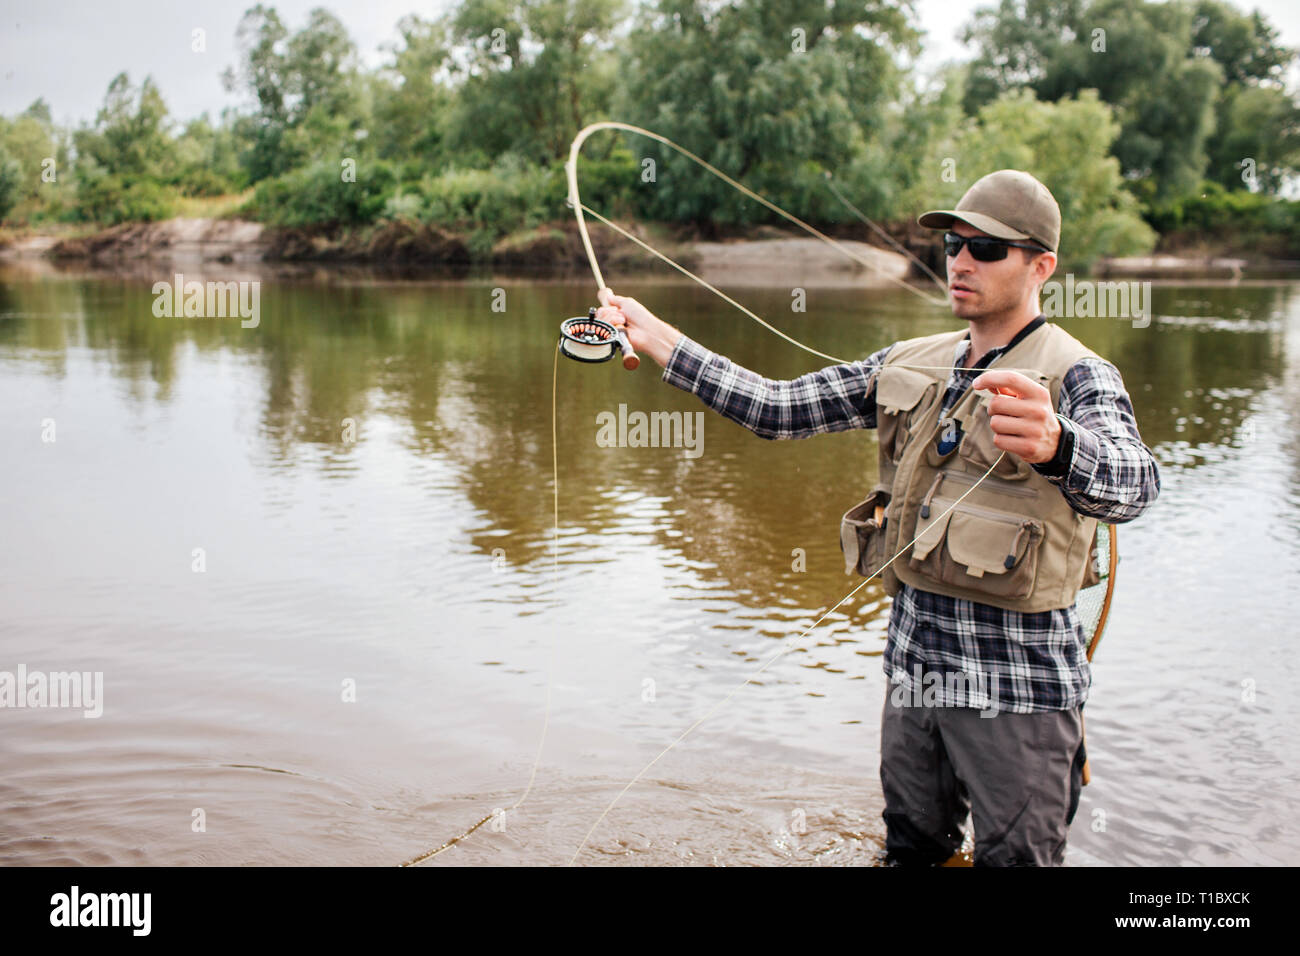 https://c8.alamy.com/comp/T1BXCK/serious-fisherman-stands-on-shallow-an-waving-with-fly-fishing-also-he-has-a-spoon-in-other-hand-guy-is-looking-to-the-left-he-is-concentrated-T1BXCK.jpg